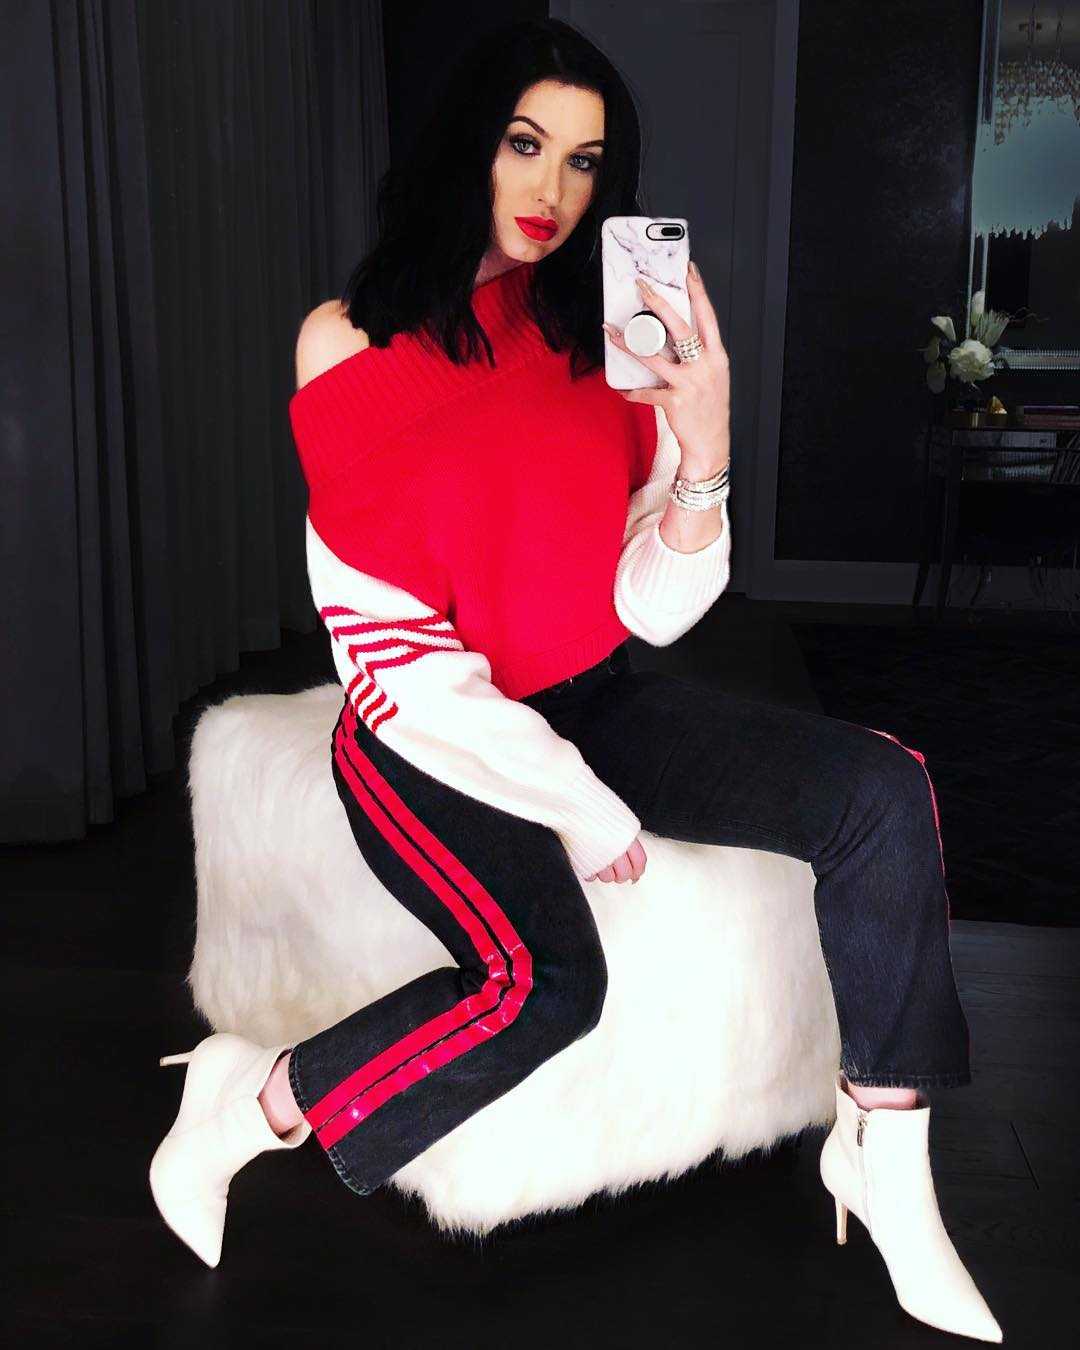 51 Sexy Jaclyn Hill Boobs Pictures Will Induce Passionate Feelings for Her 188